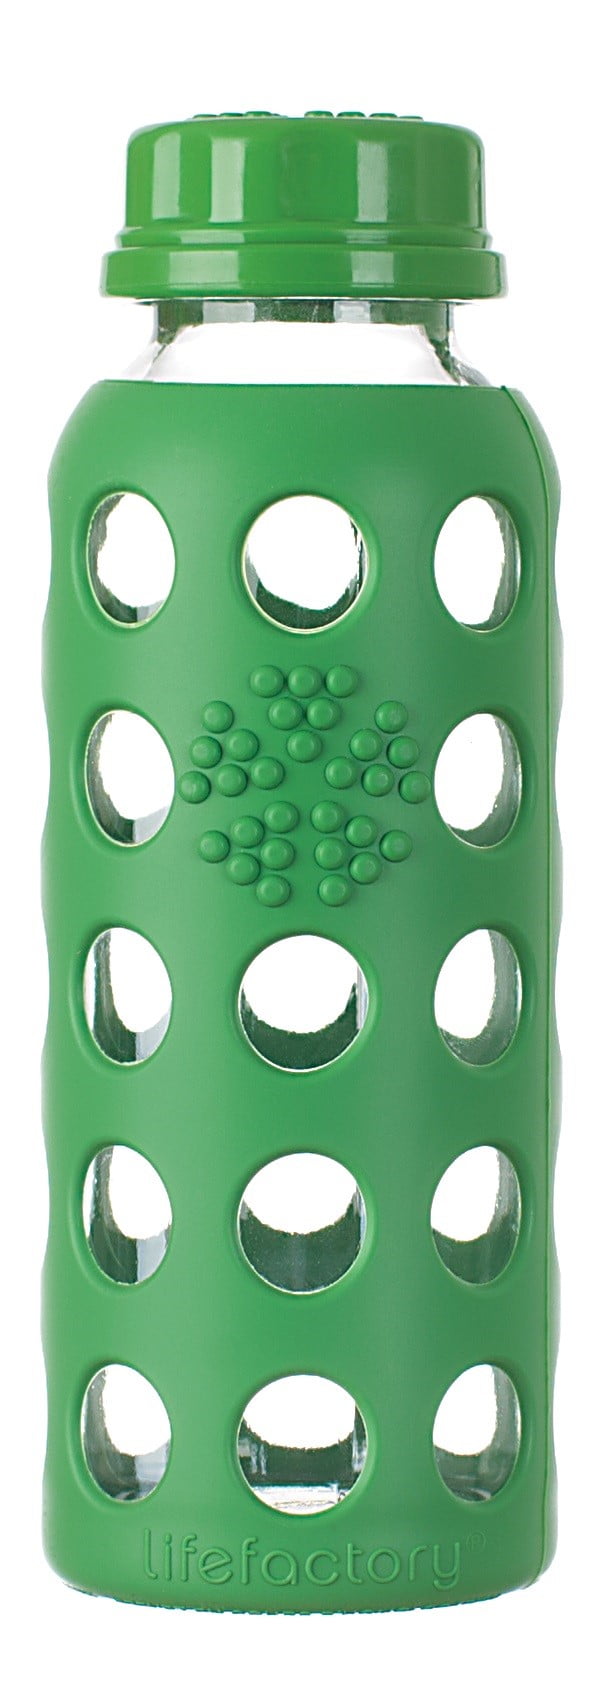 Silicone Bottle Sleeve – Green Life Trading Co.